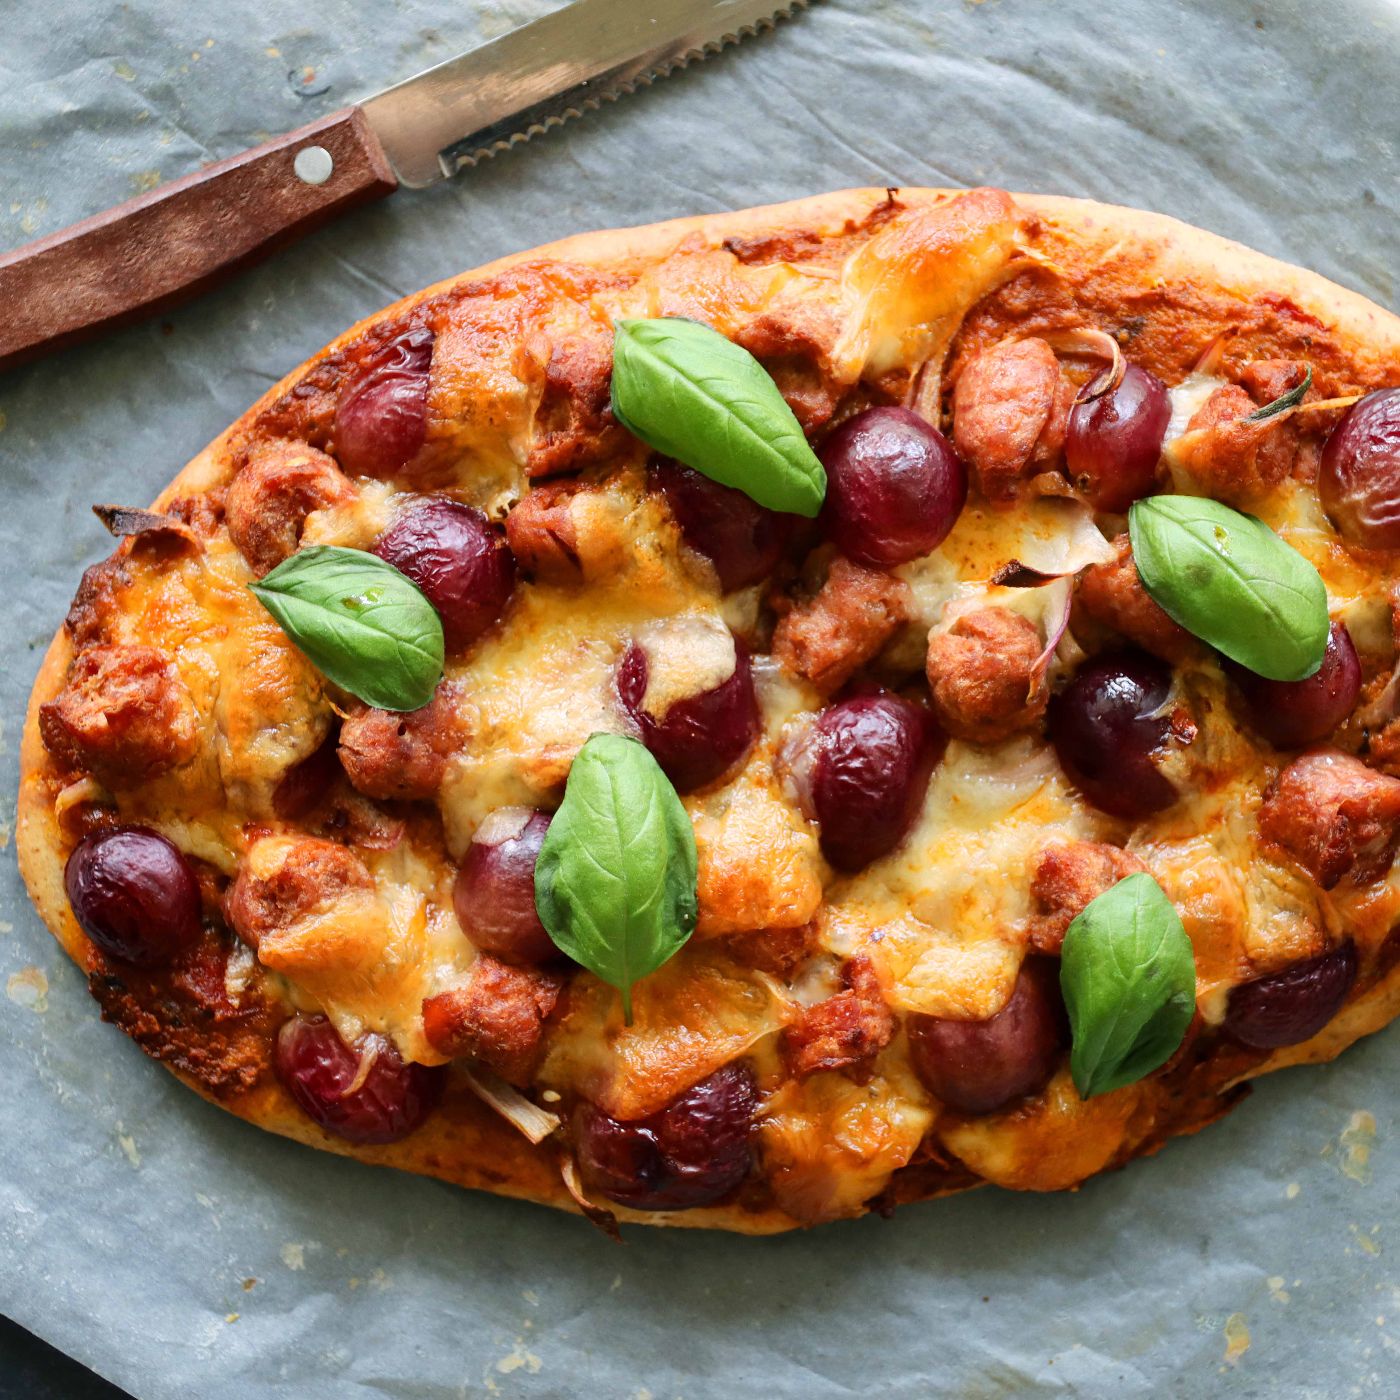 Image-of-freshly-baked-homemade-pizza-on-greaseproof-paper-with-knife-sausage-meatballs-grapes-mozzarella-cheese-basil-leaf-topping-rich-tomato-sauce-elevated-view-focus-on-foreground-1329673937_6960x4640_square.jpeg